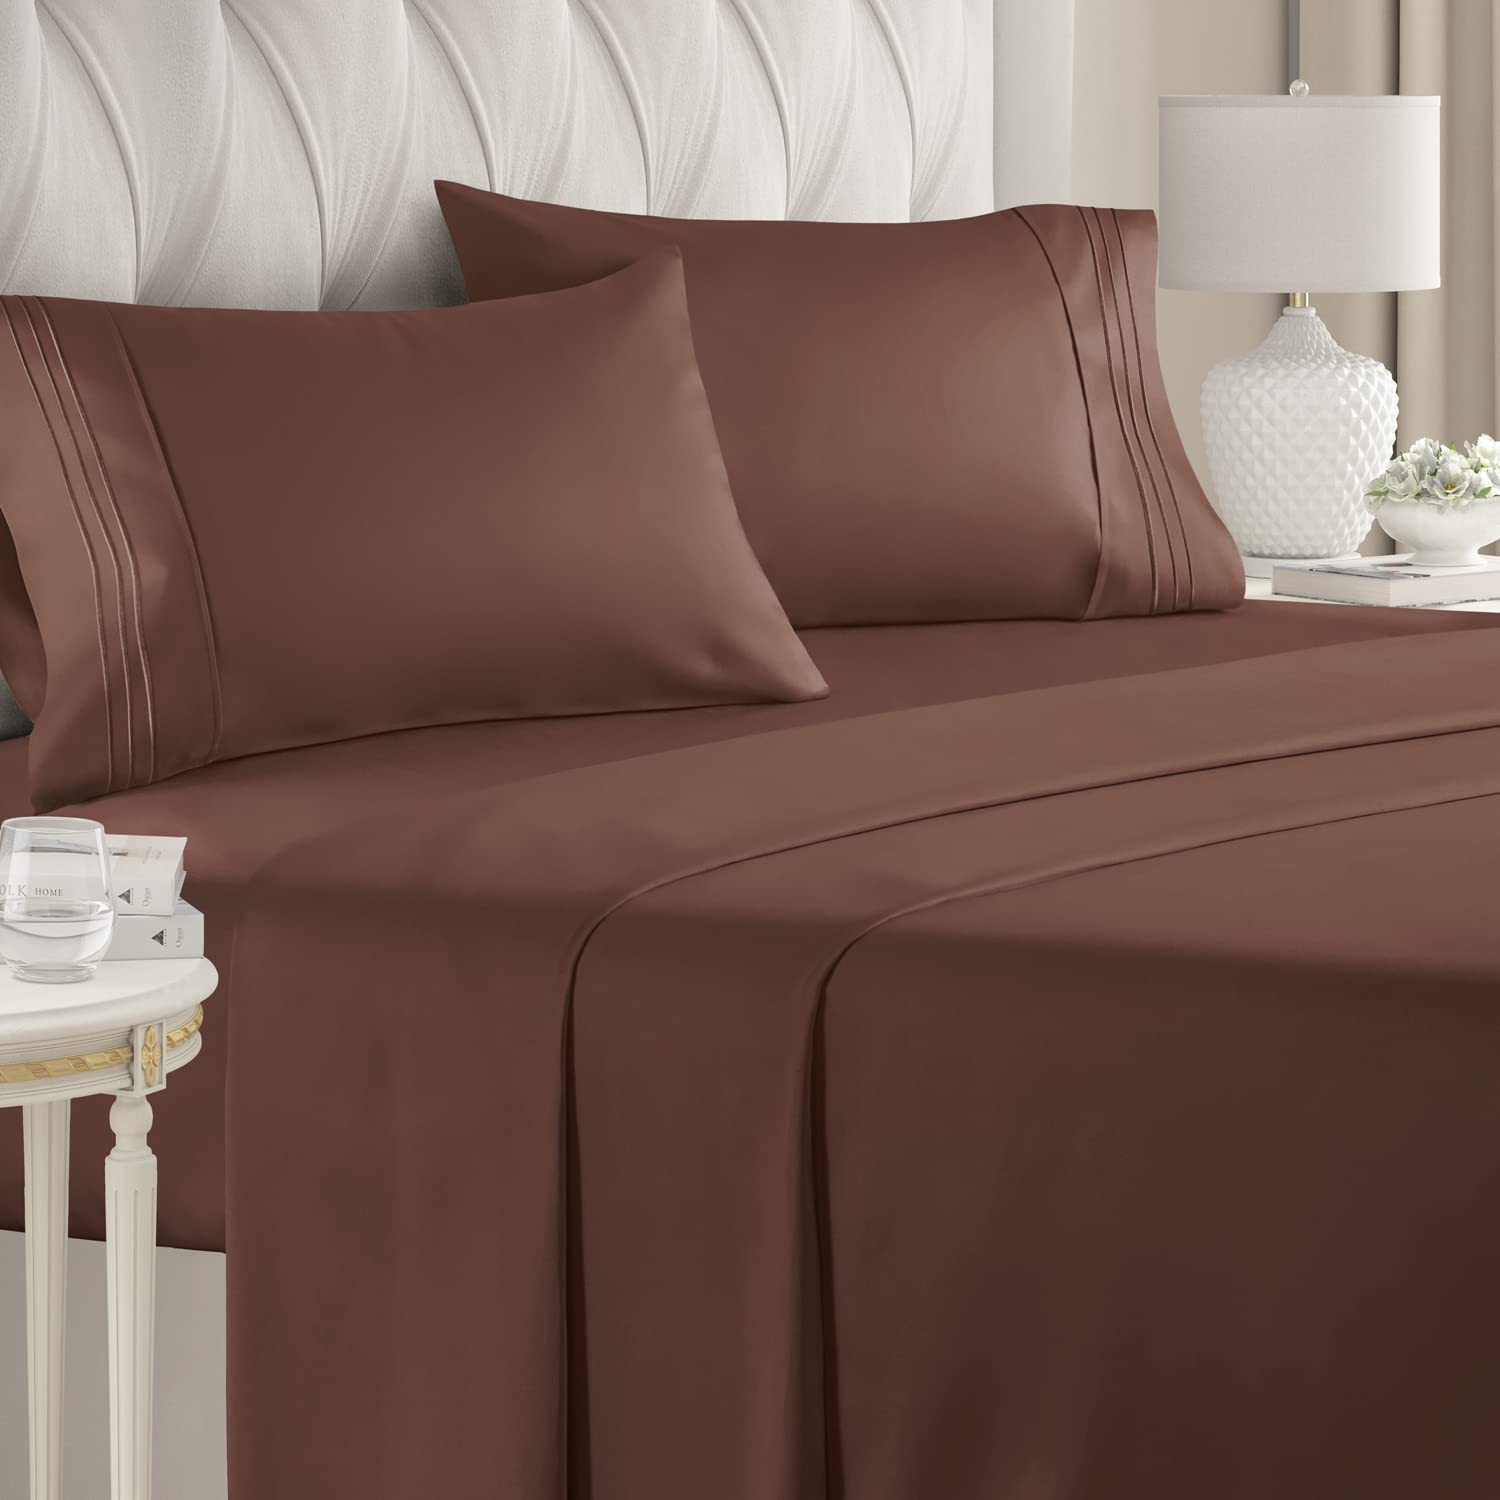 Buy King Size Chocolate Sheet Set Egyptian Cotton 1000TC - All Sizes at-Egyptianhomelinens.com